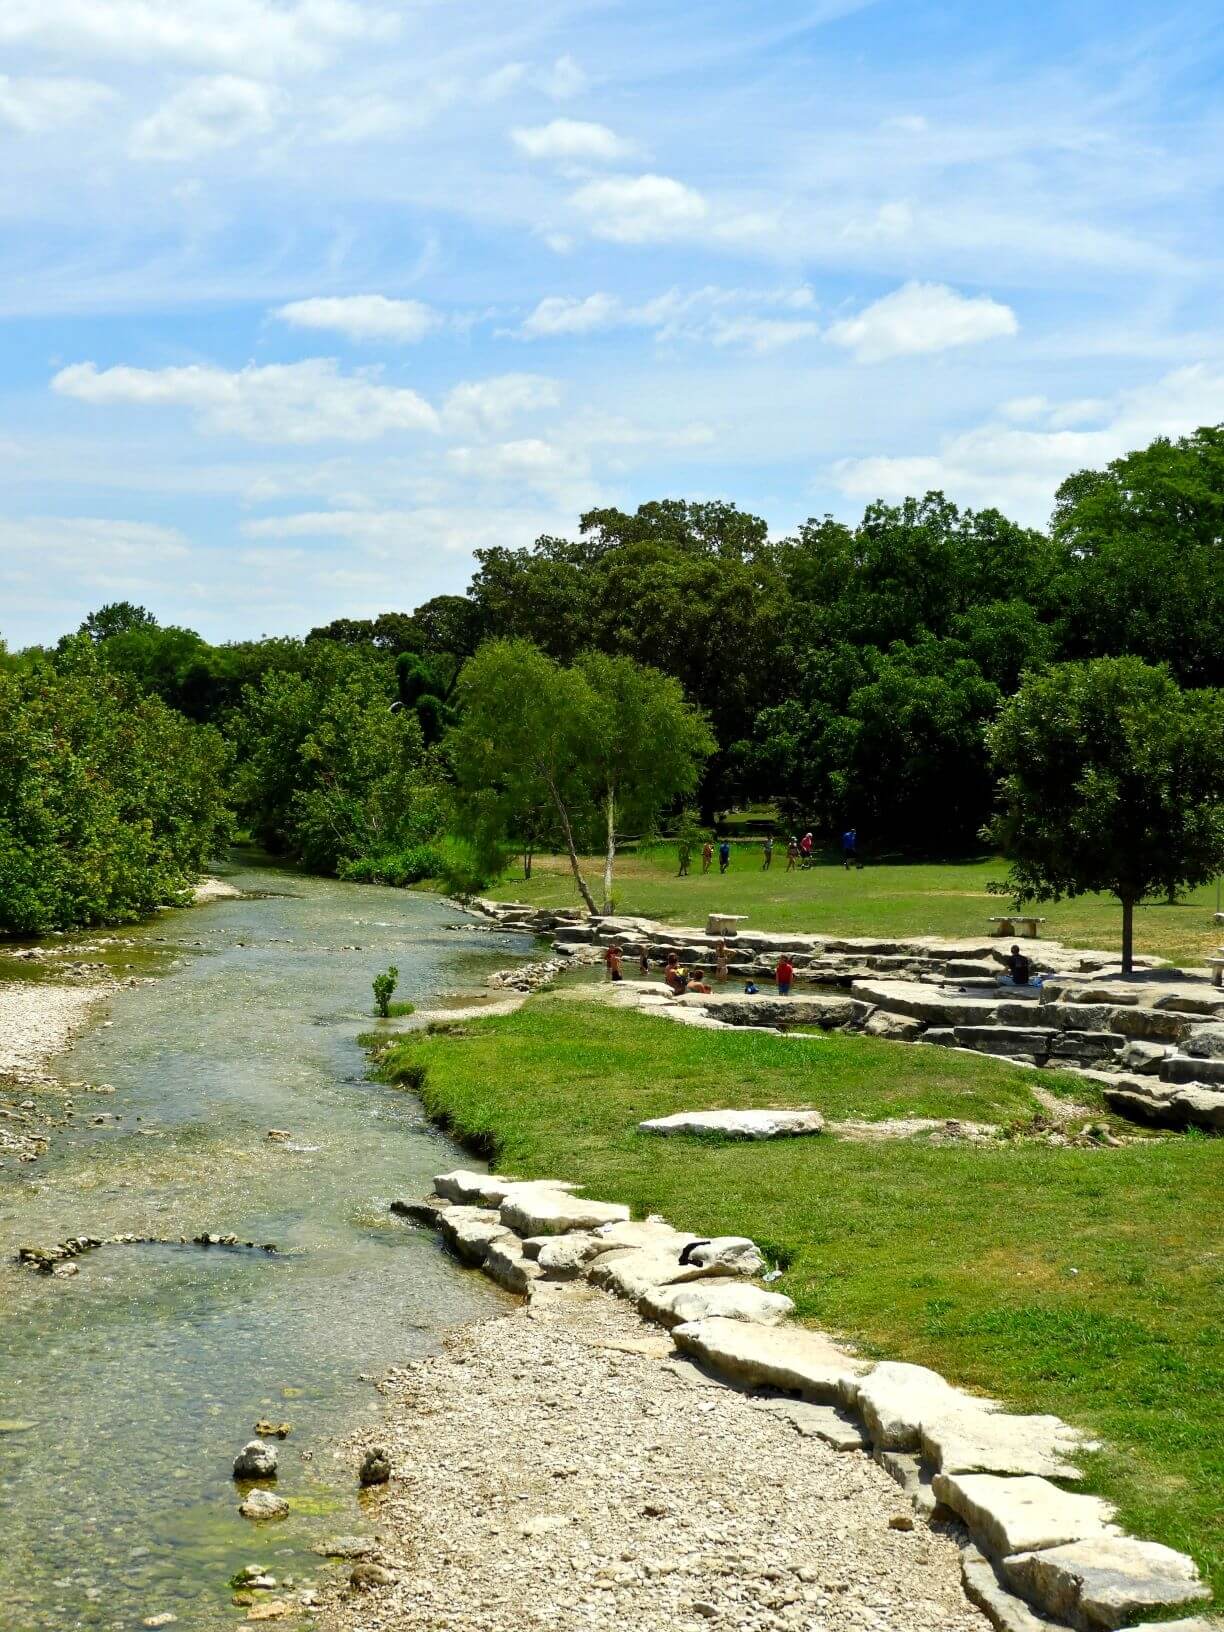 Salado Creek east view with people swimming in it.